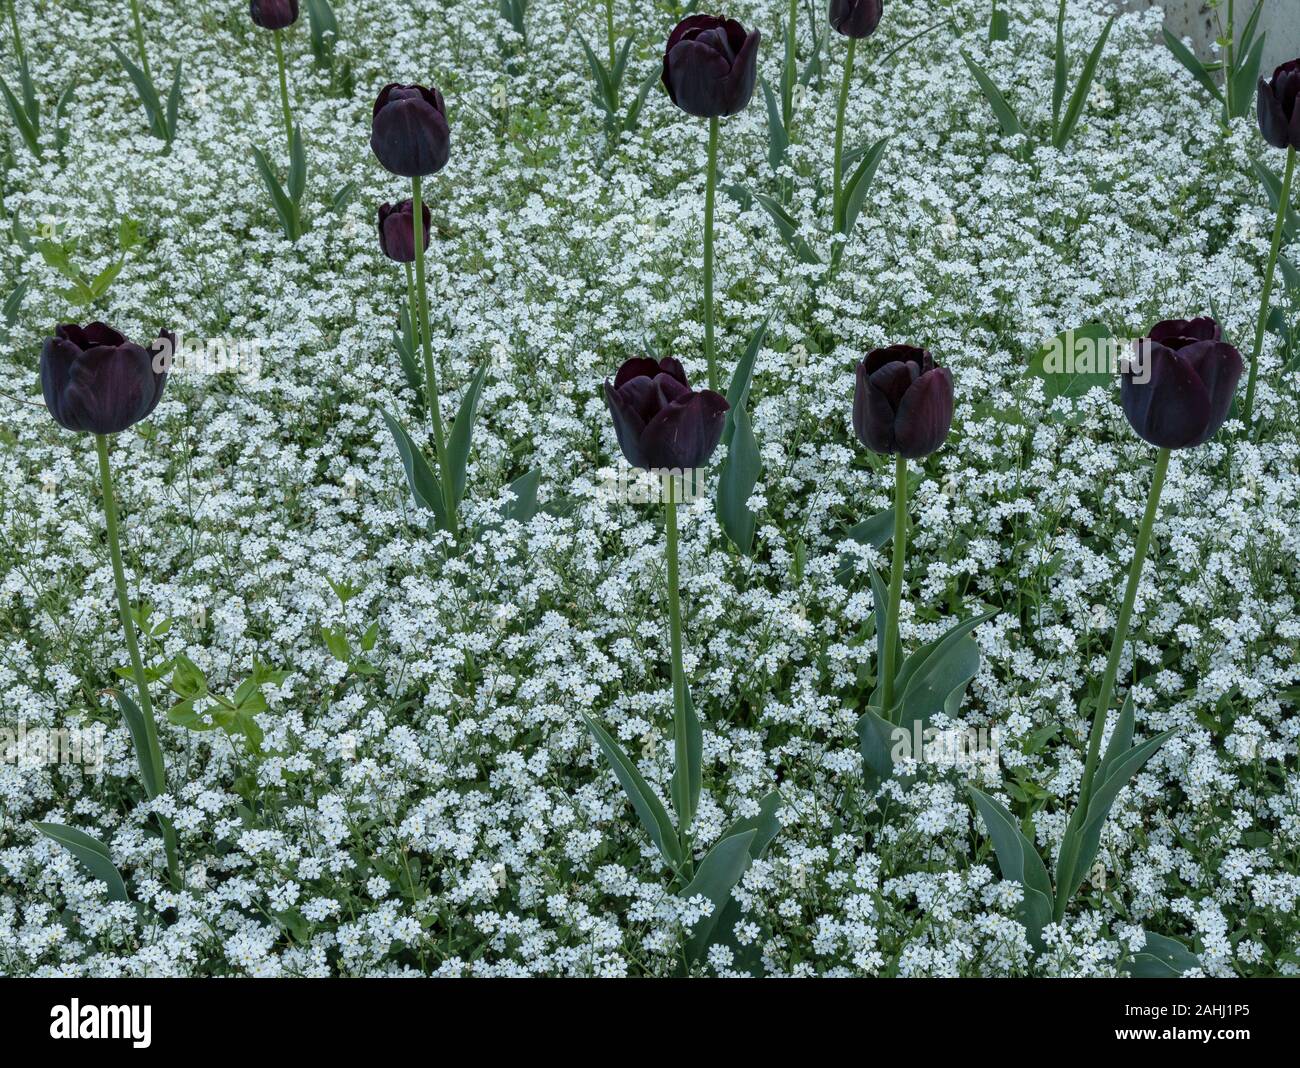 The dark purple tulip, Tulip 'Queen of the Night', planted with white forget-me-not, Myosotis. Central Zagreb, Croatia. Stock Photo